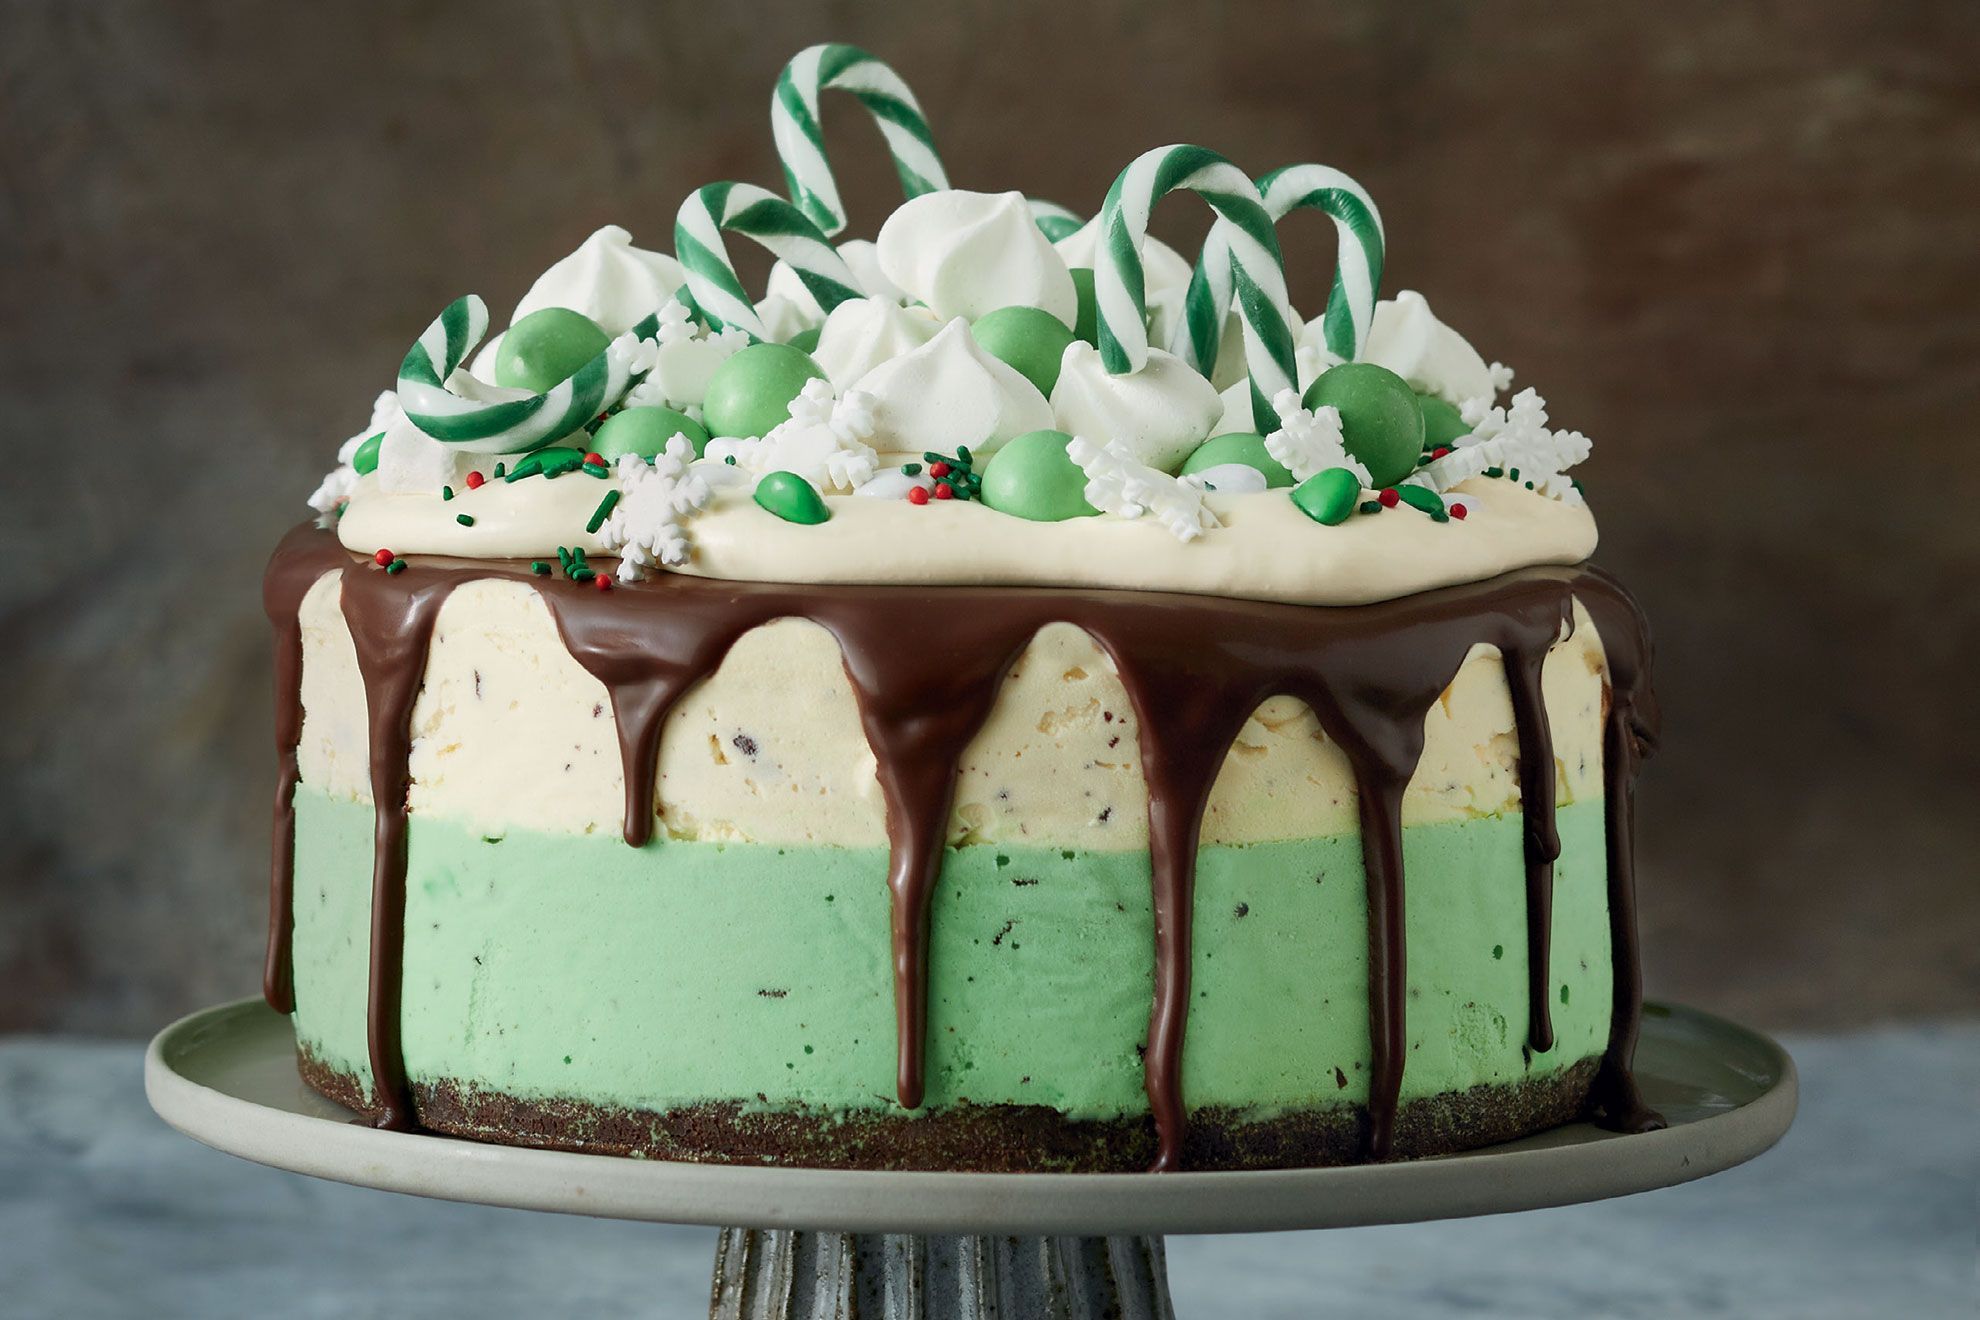 Layers of vanilla and peppermint ice cream (dotted with crushed choc mint balls) are covered in melted chocolate and topped with the striking green Darrell Lea Minty Crunchy Chocolate Balls. 8 Ingredients - 2 x 185g pkts Darrell Lea Minty Crunchy Chocolate Balls - 2L vanilla ice-cream - Green liquid food colouring, to tint - 1 tsp peppermint extract - 125g Choc Ripple biscuits - 40g butter, melted - 100g Darrell Lea dark chocolate, chopped - 2 tbsp thickened cream 6 Method / Steps Step 1 Grease a 7.5cm-deep, 8.5 x 17.5cm (base measurement) loaf pan. Line base and sides with baking paper, extending paper 2cm above the edge of the pan. Place one packet of the chocolate balls in a sealable plastic bag. Use a rolling pin to pound and finely crush. Step 2 Place half of the ice cream in a large bowl. Set aside, at room temperature, for 10 minutes to soften slightly. Add half the crushed chocolate balls. Use a spatula to fold together until well combined. Spoon the ice-cream mixture over the base of the prepared pan. Smooth the surface. Place in the freezer for at least 30 minutes or until required. Step 3 Place remaining ice cream in a large bowl. Set aside, at room temperature, for 10 minutes to soften slightly. Add a few drops of green food colouring, a few drops of peppermint extract, and the remaining crushed chocolate balls. Use a spatula to fold together until well combined. Spoon mixture over vanilla ice-cream layer. Smooth the surface. Place in the freezer for at least 30 minutes or until required. Step 4 Place biscuits in a food processor and process until finely chopped. Add butter. Process until well combined. Press mixture over top of green ice-cream layer. Freeze for 6 hours or overnight until set. Step 5 Place dark chocolate and cream in a microwave-safe bowl. Microwave on High, stirring halfway through, for 1 minute or until melted and smooth. Set aside for 15 minutes to cool slightly. Step 6 Turn cake onto a serving plate. Spoon chocolate mixture over the cake, allowing it to drip down the long sides (see note). Decorate with rows of remaining whole chocolate balls. Serve immediately. source - cooking365coza